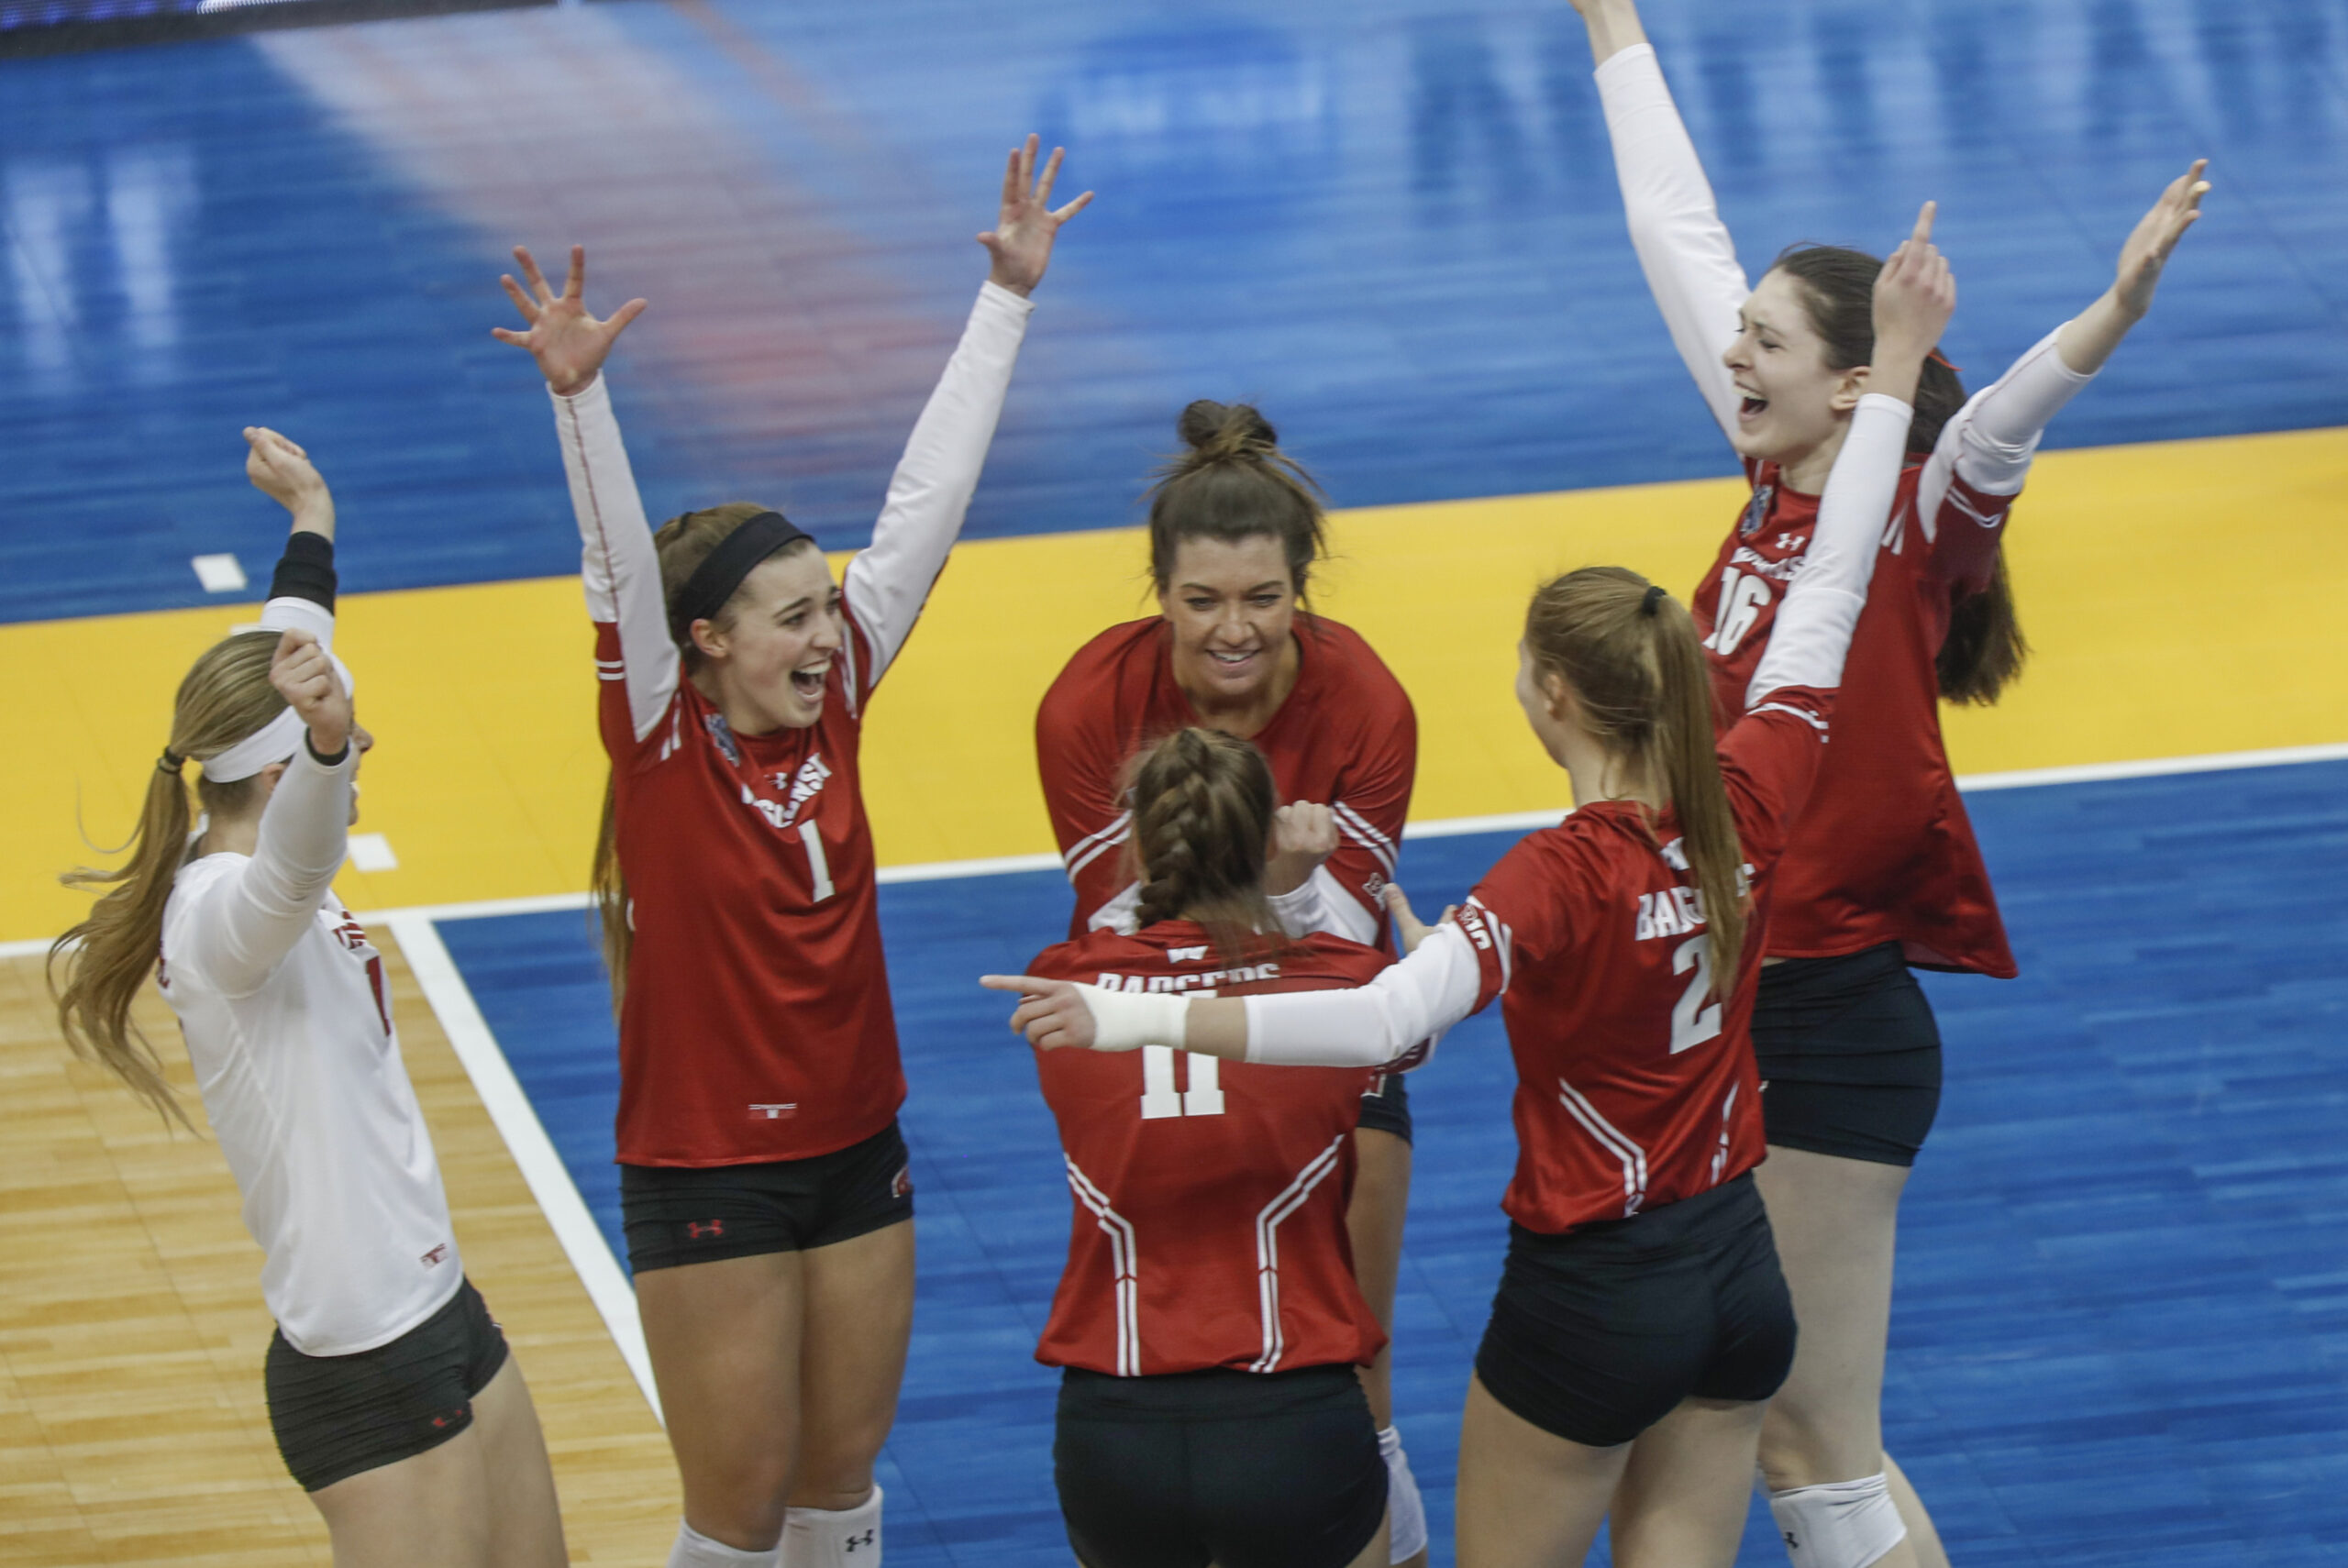 The Wisconsin team celebrates after defeating Baylor in a semifinal of the NCAA Division I women's volleyball championships, Thursday Dec. 19, 2019